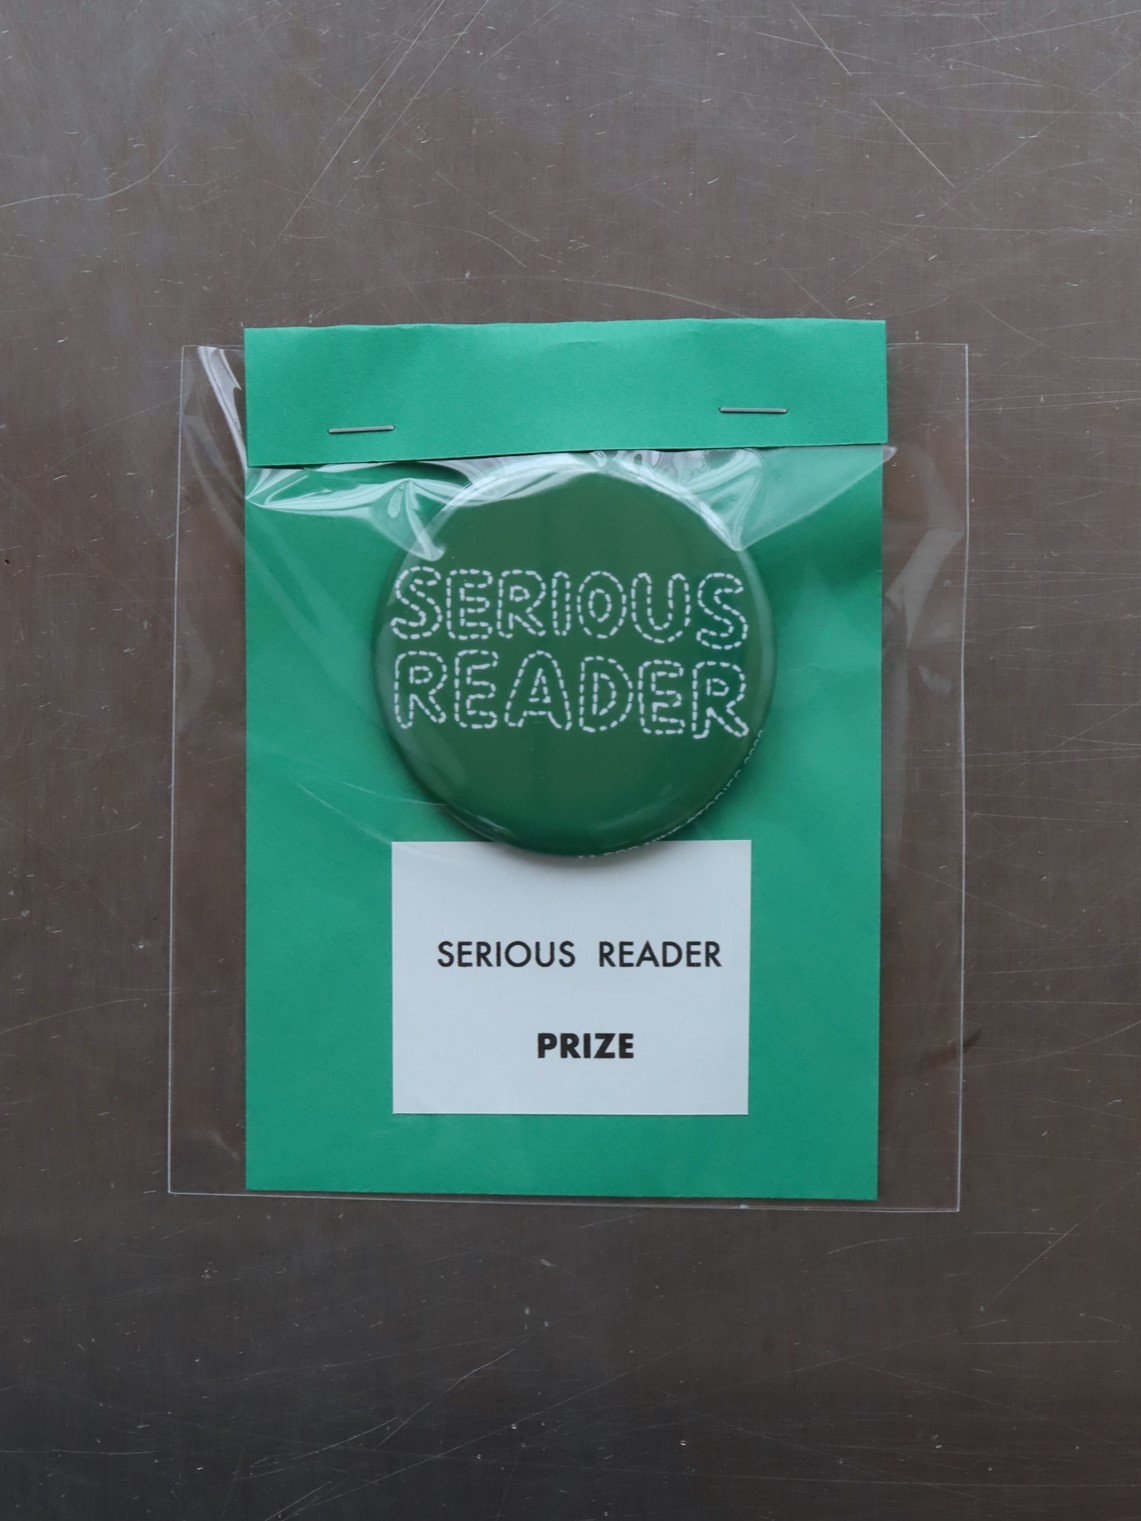 NINE STORIES　SERIOUS  READER  PRIZE　バッジ　green